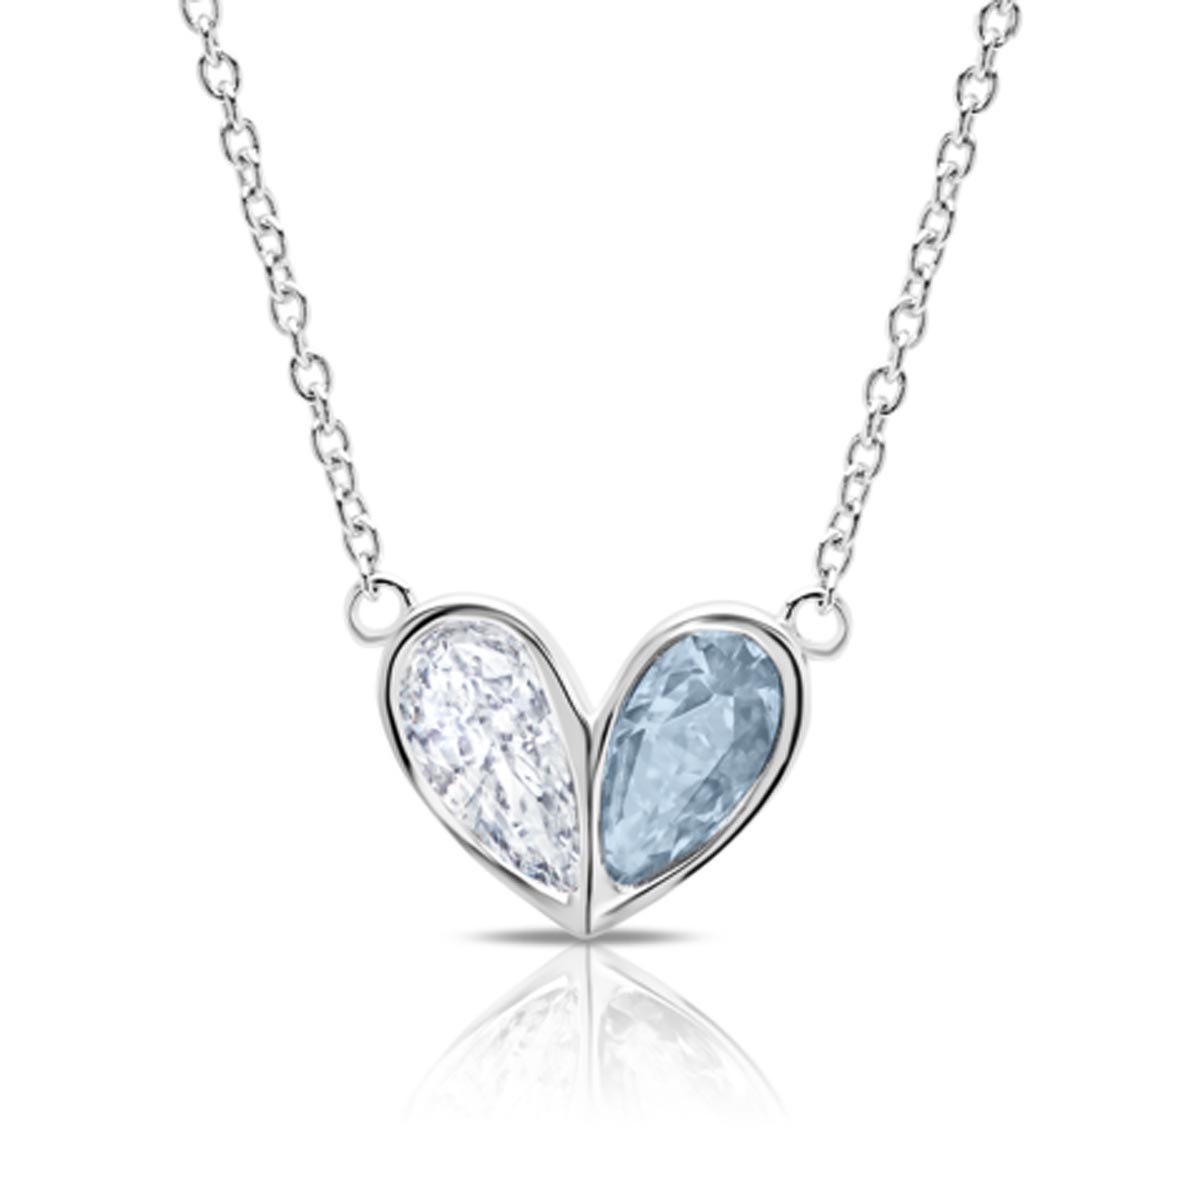 Crislu Blue and White Cubic Zirconia Heart Necklace in Sterling Silver with Platinum Finish